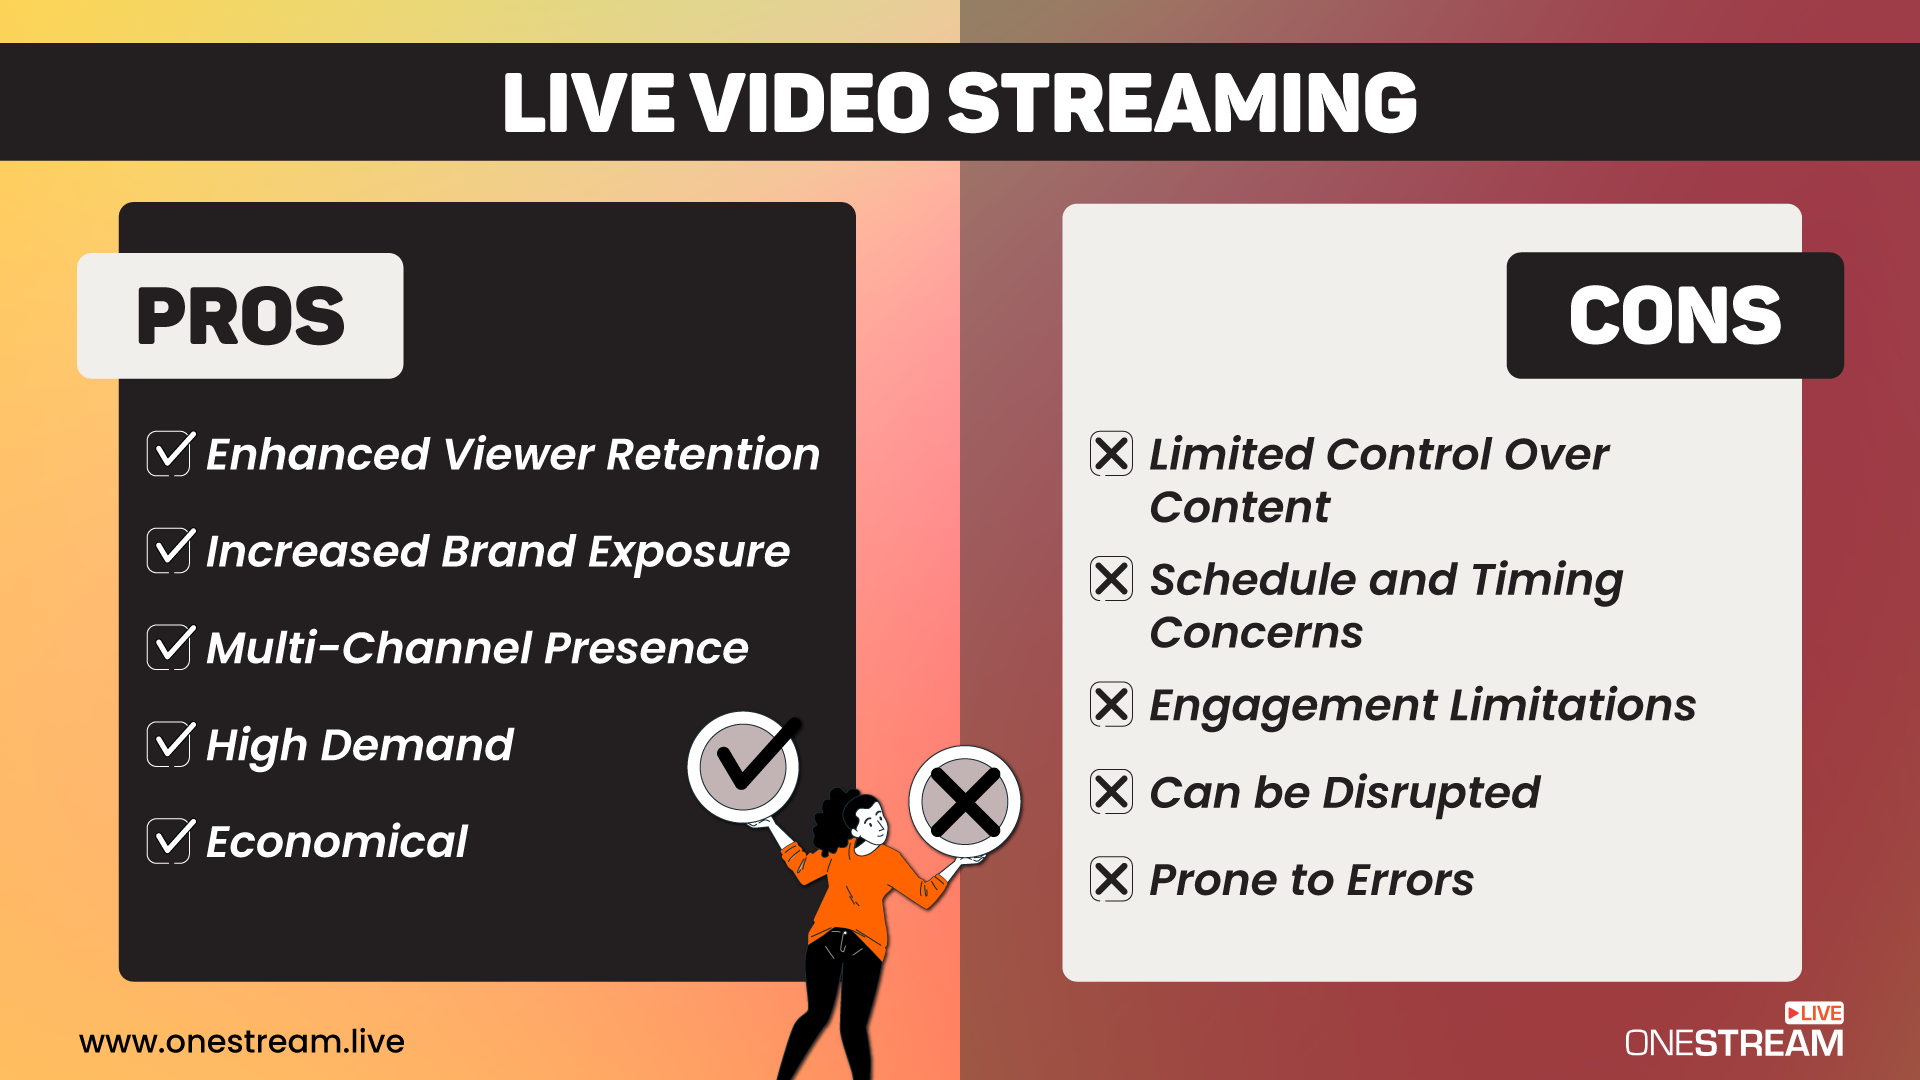 Pros & Cons of Live Video Streaming